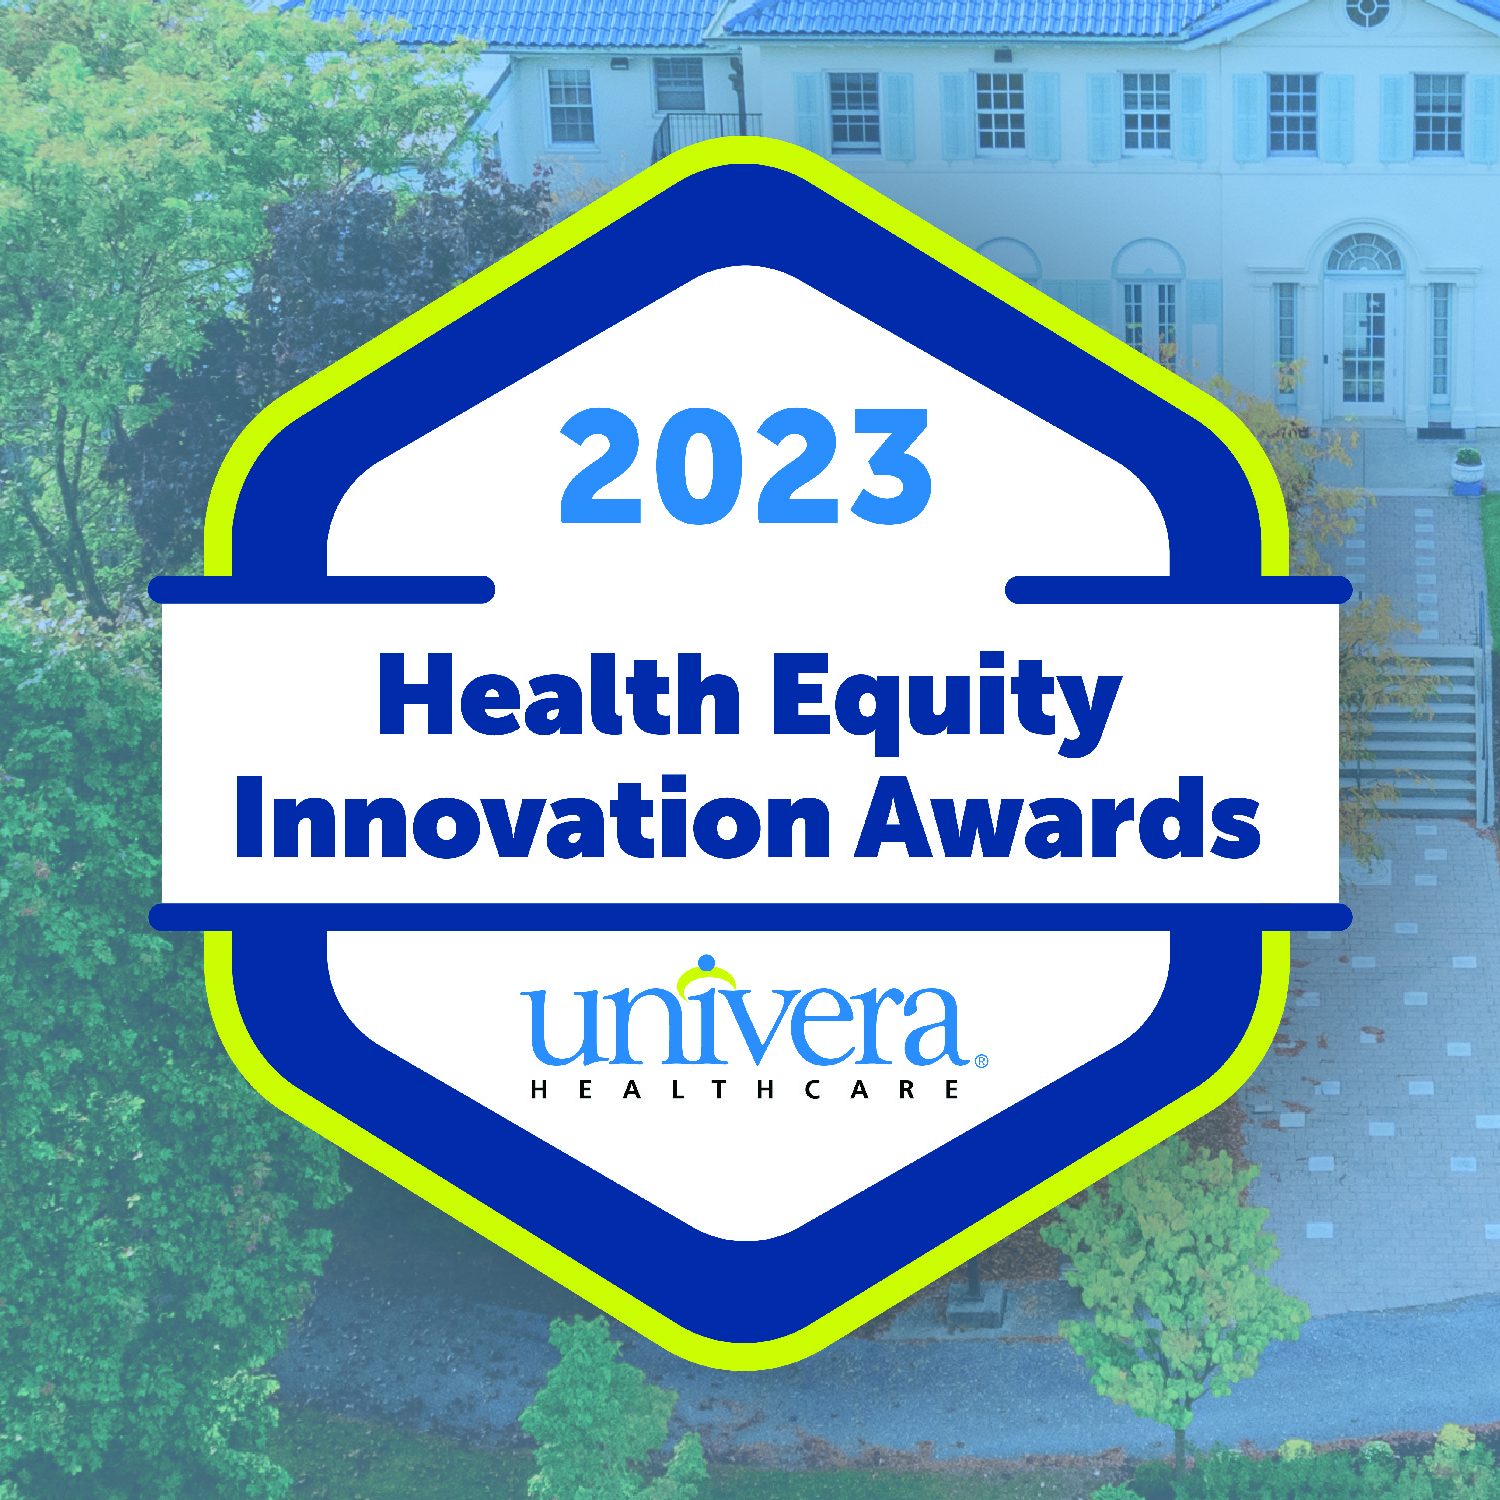 Health Equity and Innovation Awards seal